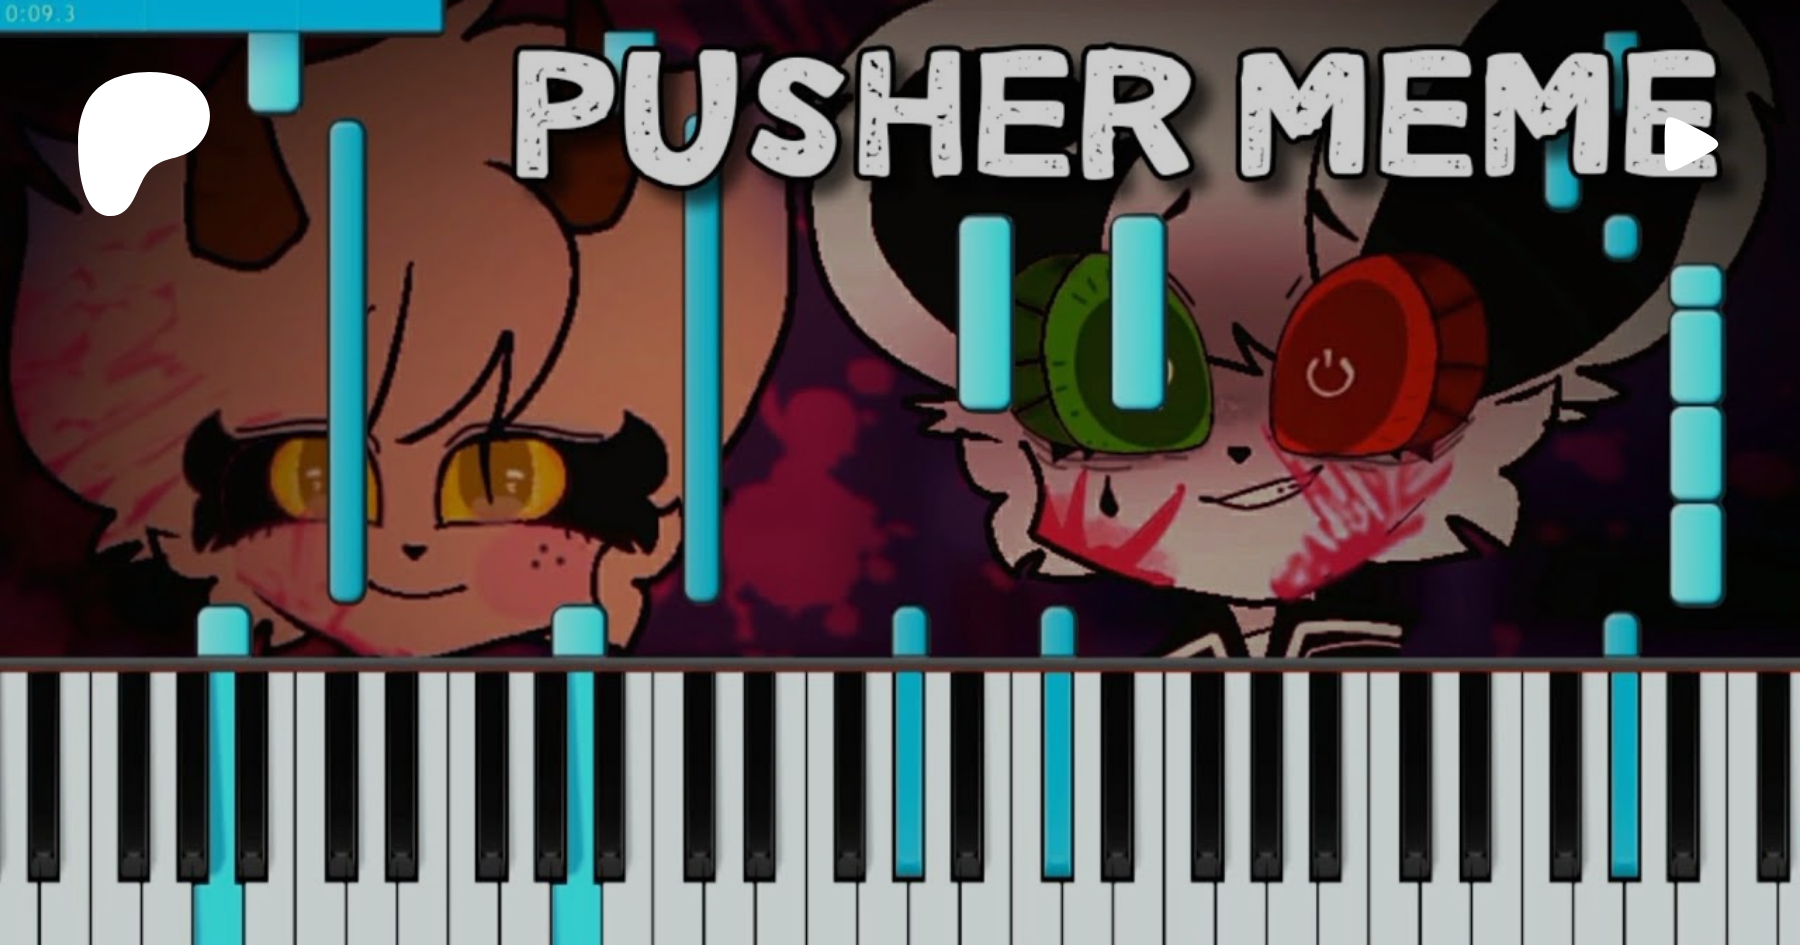 Pusher Meme Roblox Piggy Alpha Piano Sheets And Midi Musicbyby On Patreon - roblox pushen